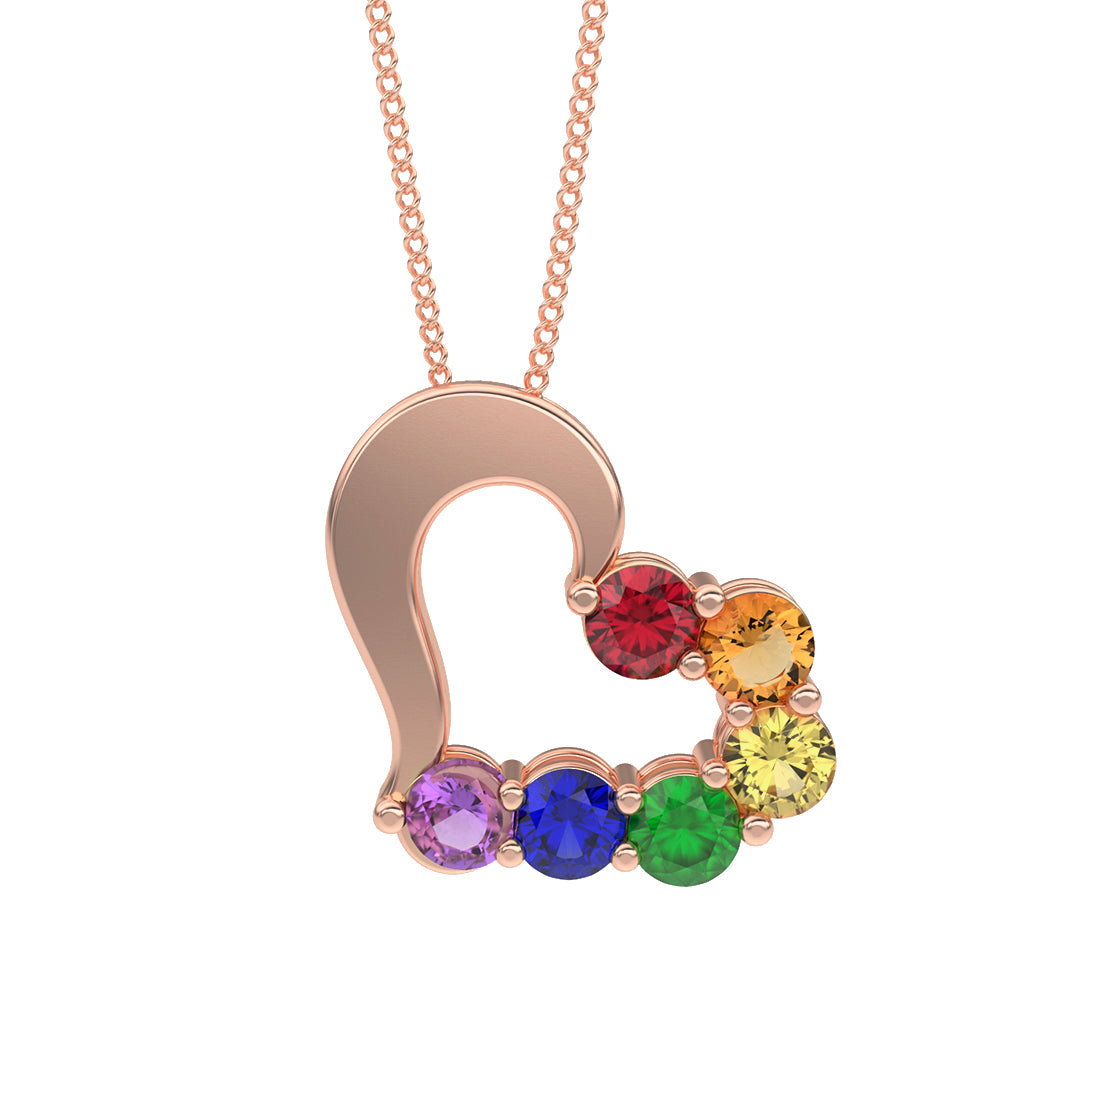 Rainbow Heart Necklace in 14k Rose Gold